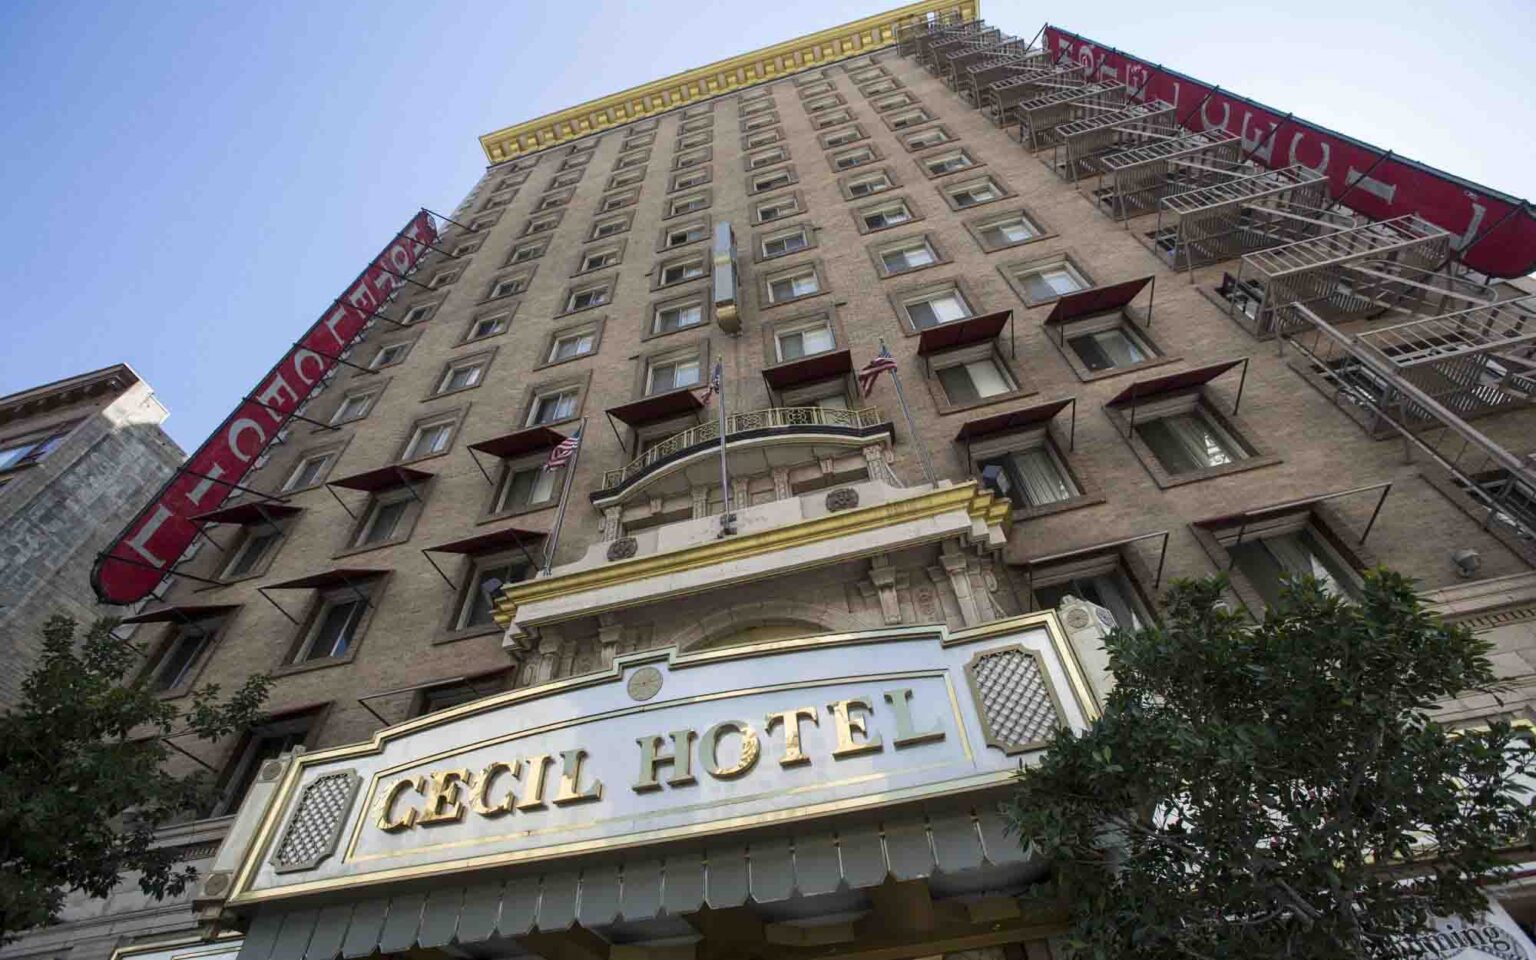 The Hotel Cecil is considered to be one of the most haunted places in the United States. Here's everything we know its blood-soaked past.